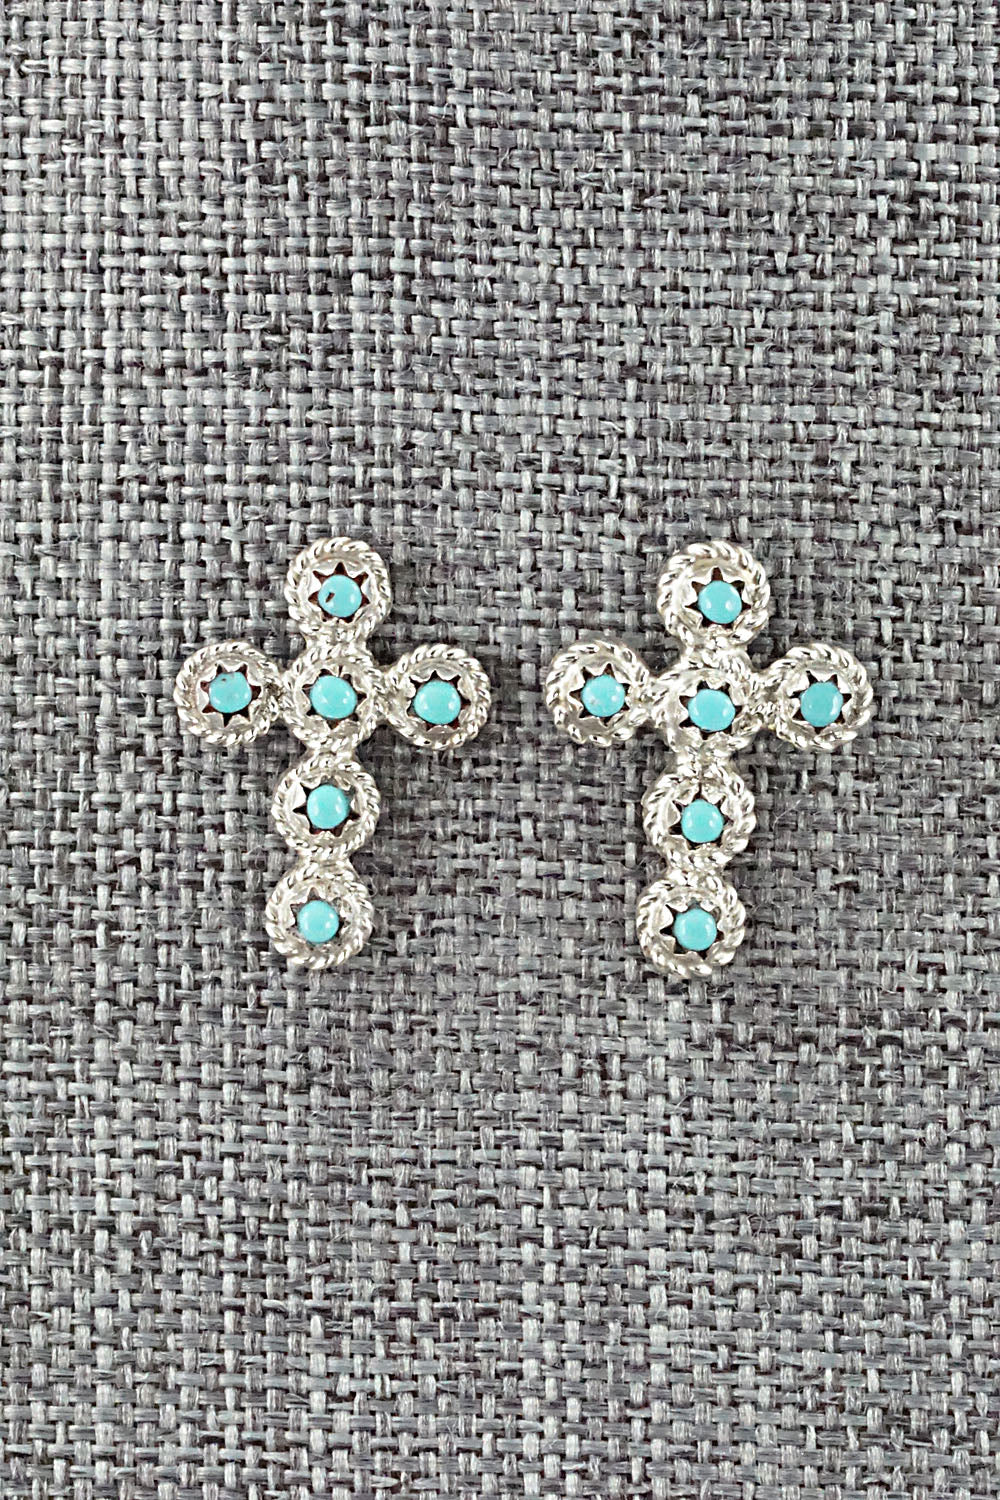 Turquoise & Sterling Silver Earrings - Michael Gchachu